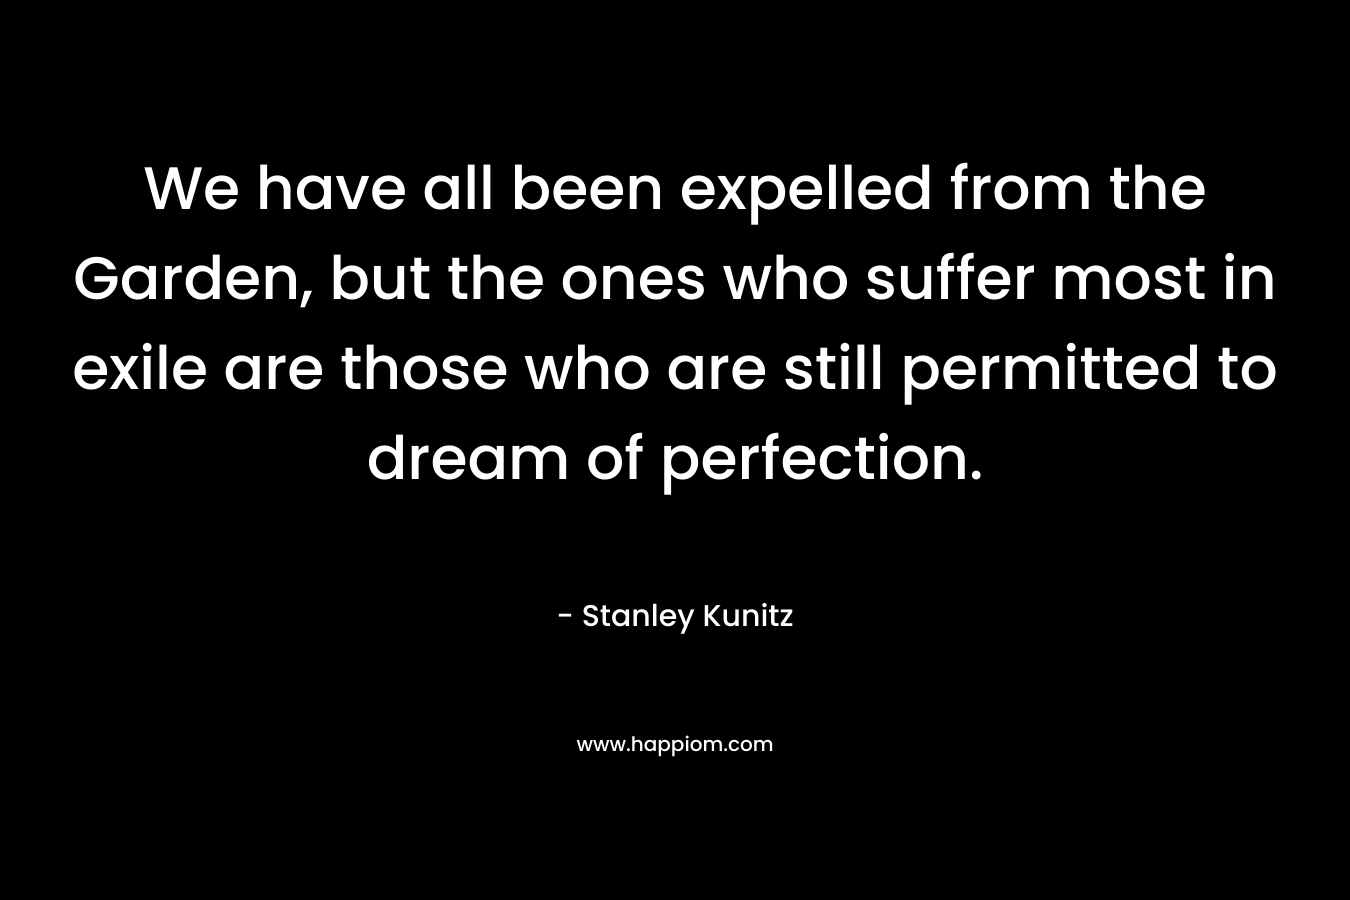 We have all been expelled from the Garden, but the ones who suffer most in exile are those who are still permitted to dream of perfection. – Stanley Kunitz